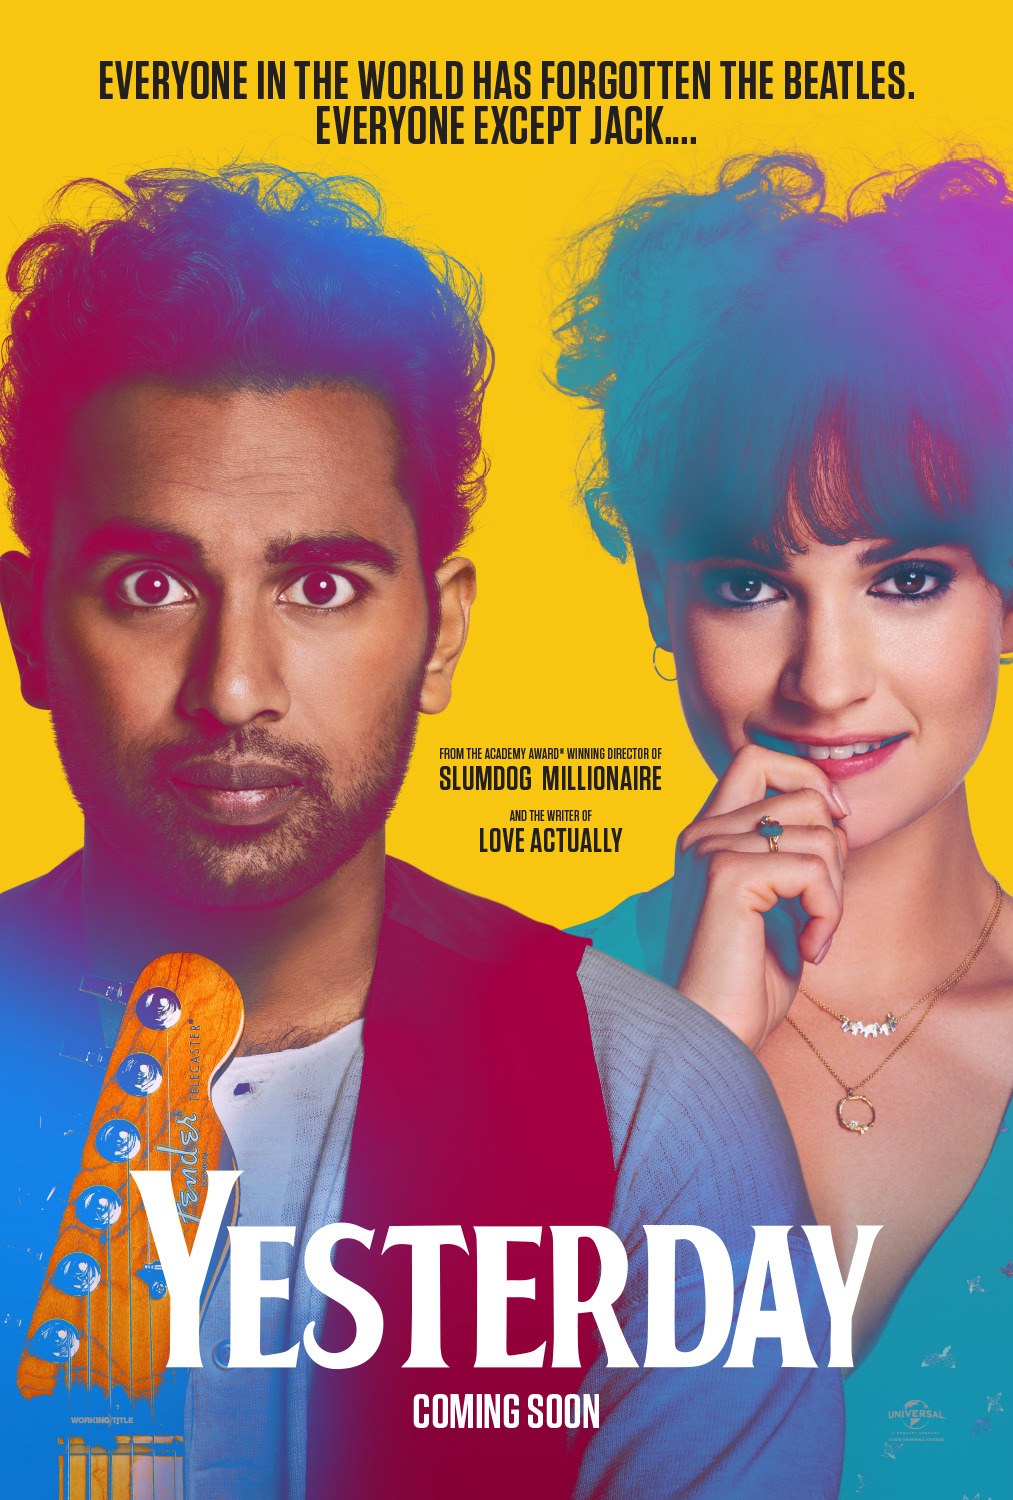 Yesterday film review: Does Danny Boyle’s Beatles comedy sing?